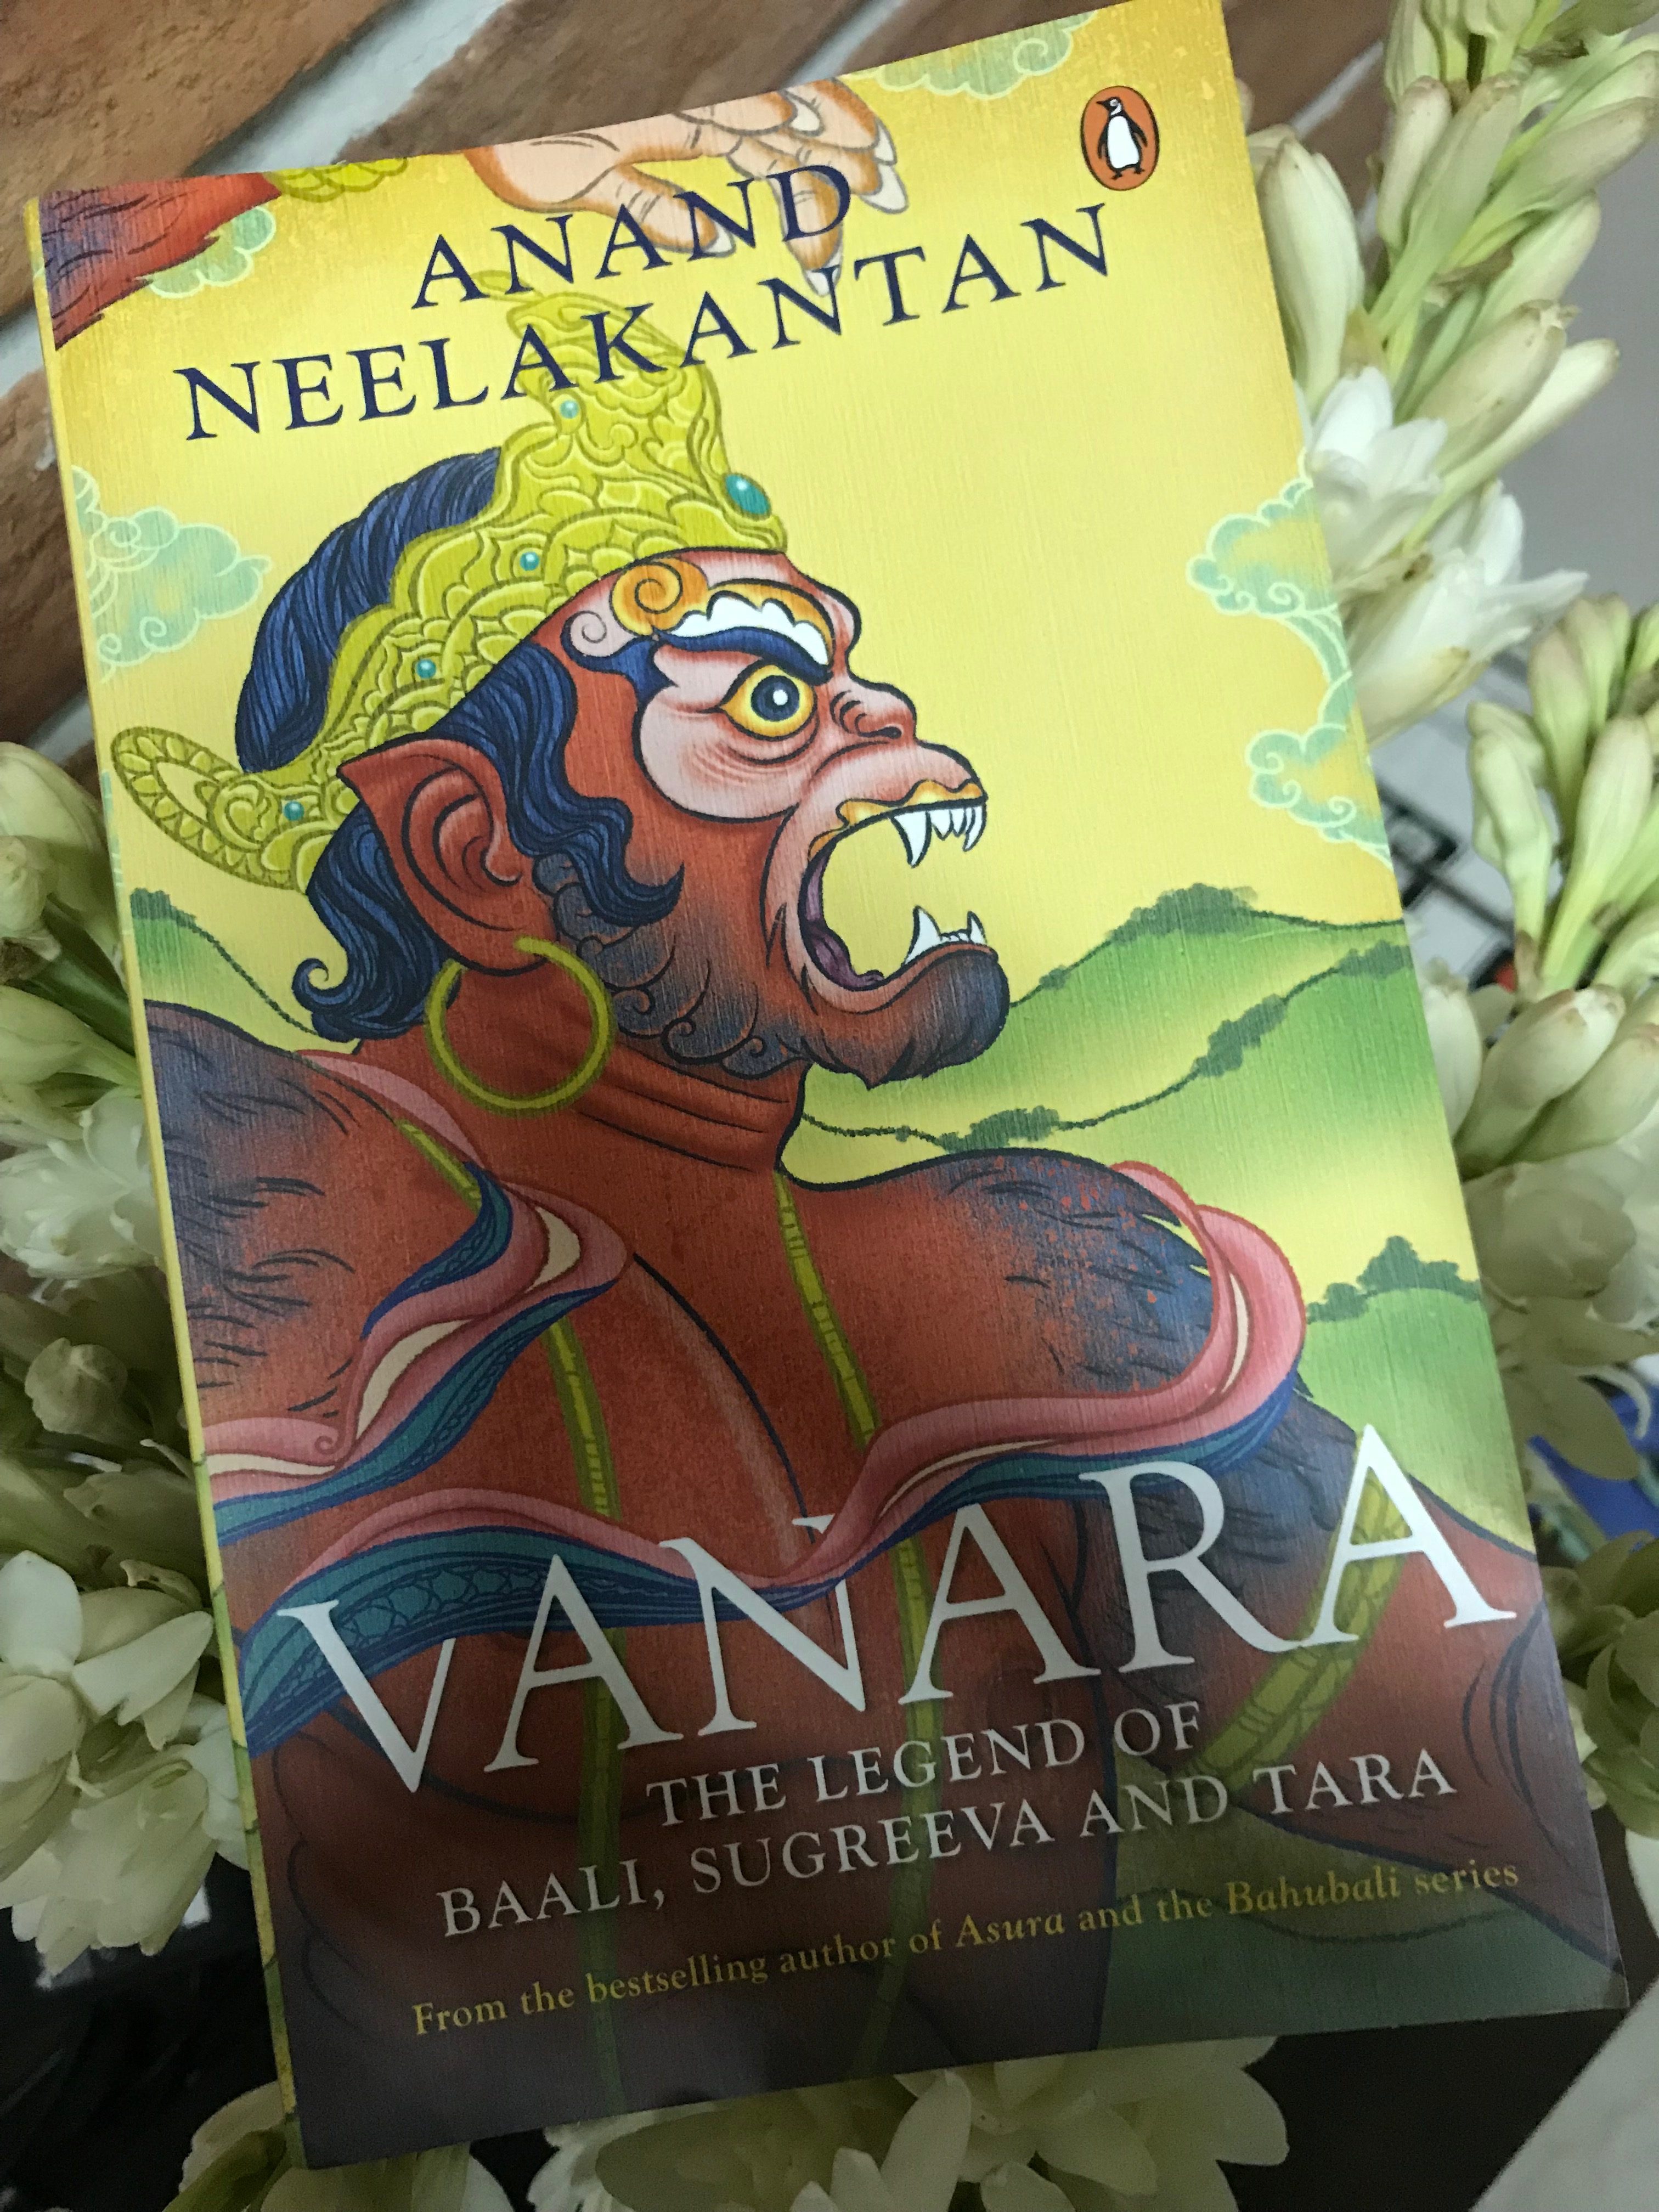 You are currently viewing Anand Neelakanthan’s Vanara- an immersive saga about the legend of Sugreeva, Baali and Tara